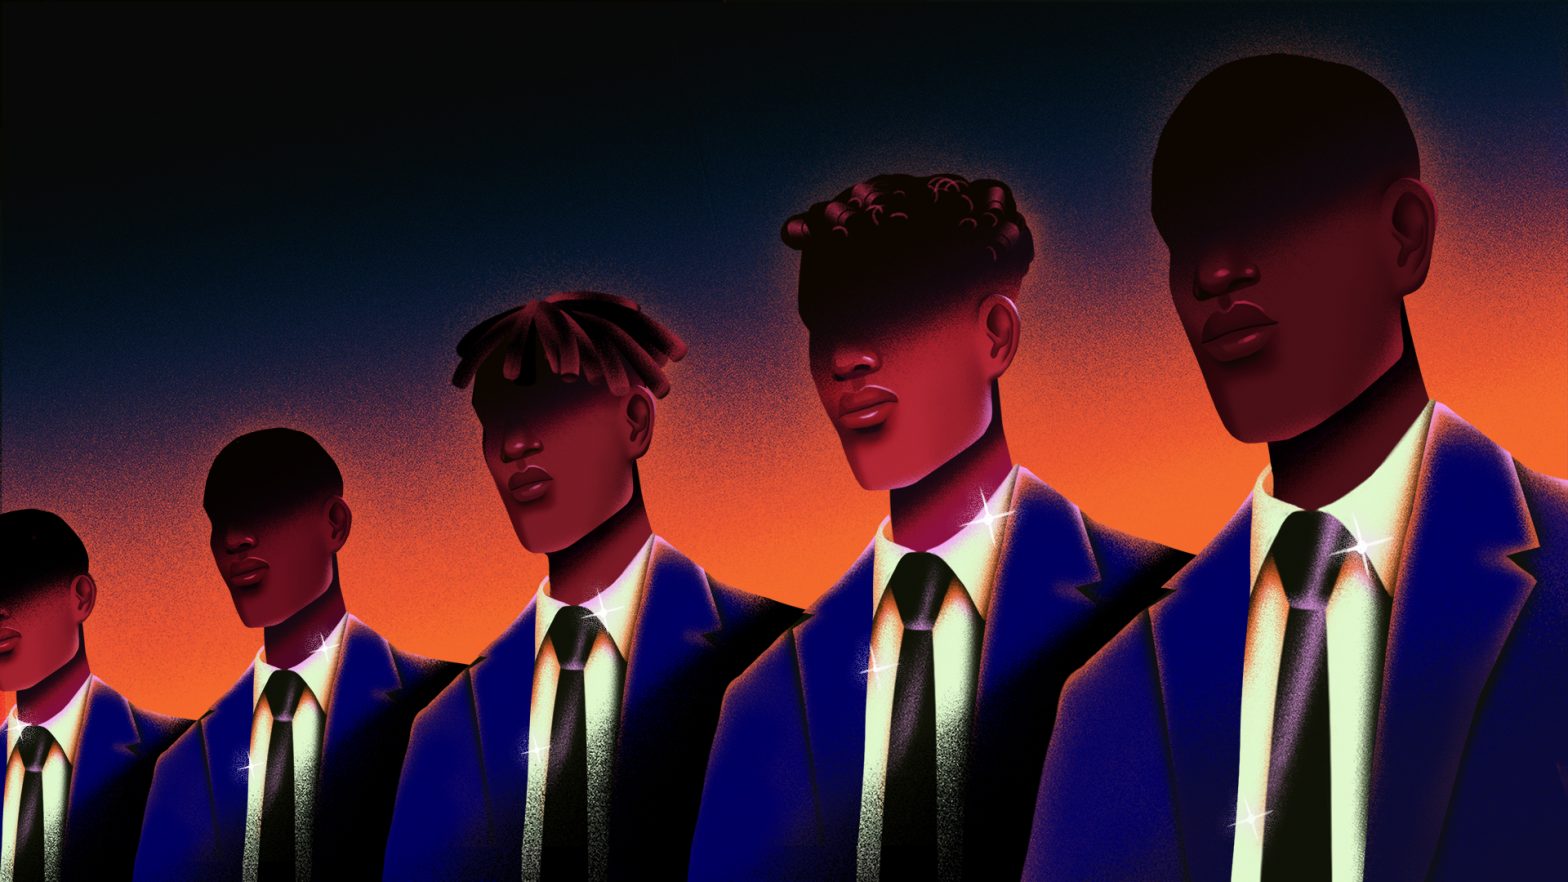 Image of five black men in a line, all wearing white shirts, black ties and blue suit jackets.